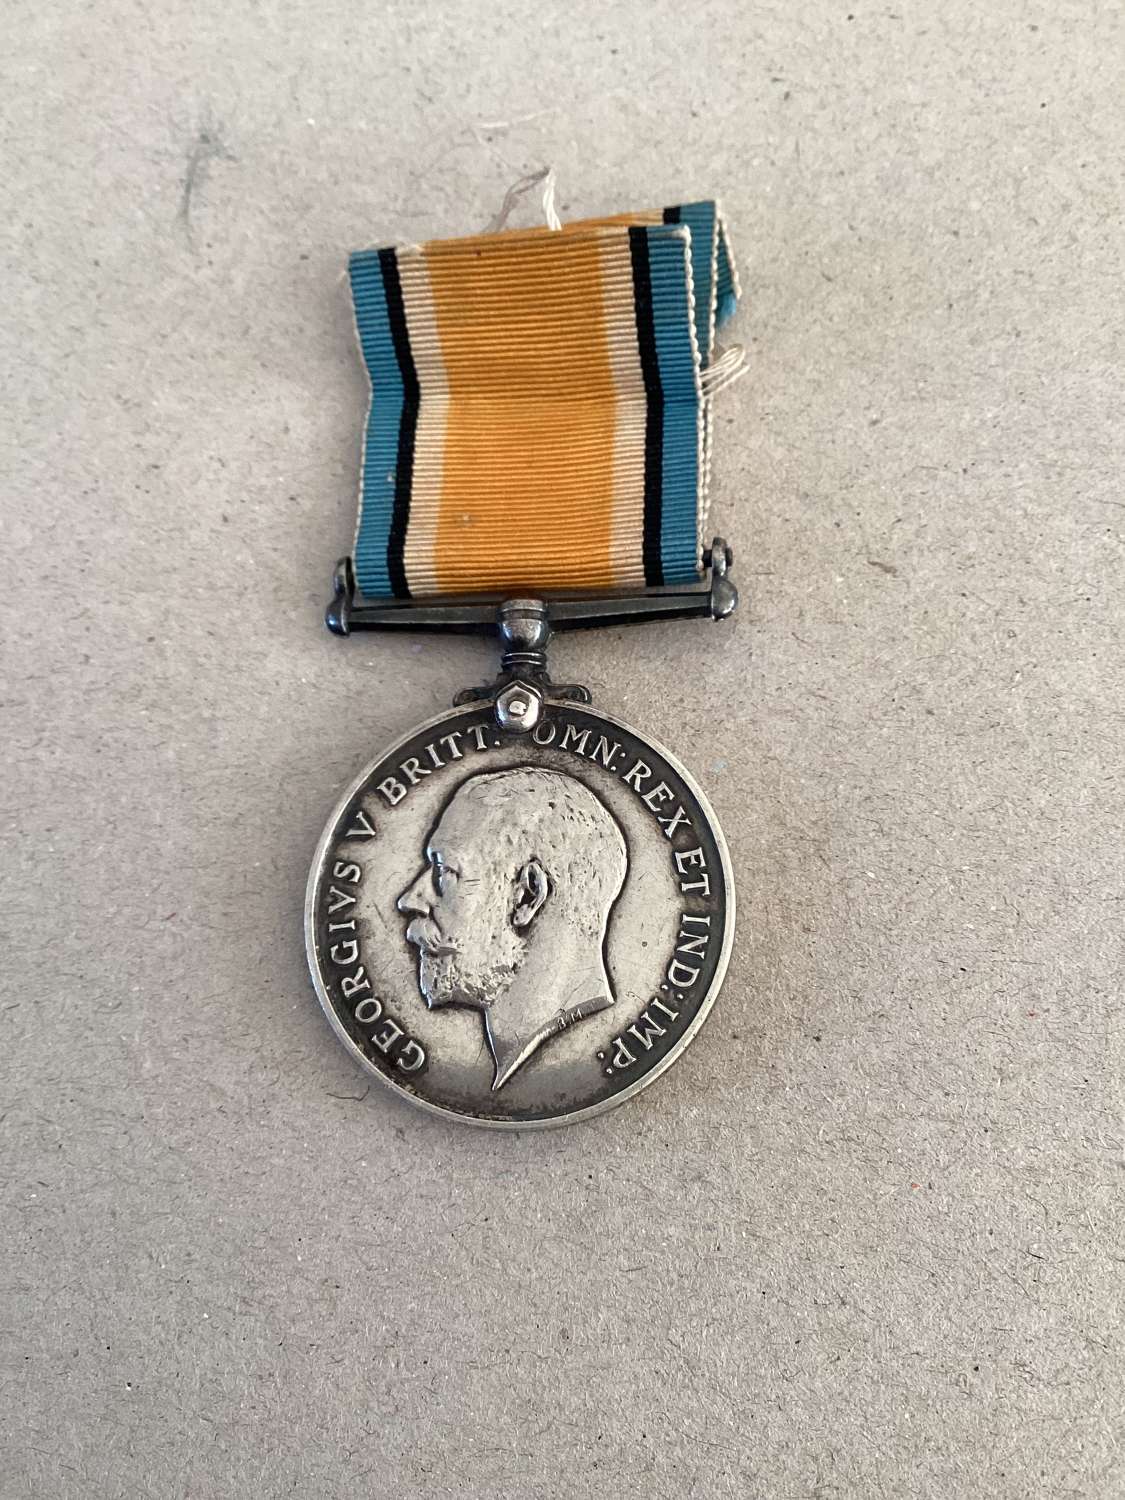 British War Medal 63778 Pte A Ardley Royal Fusiliers